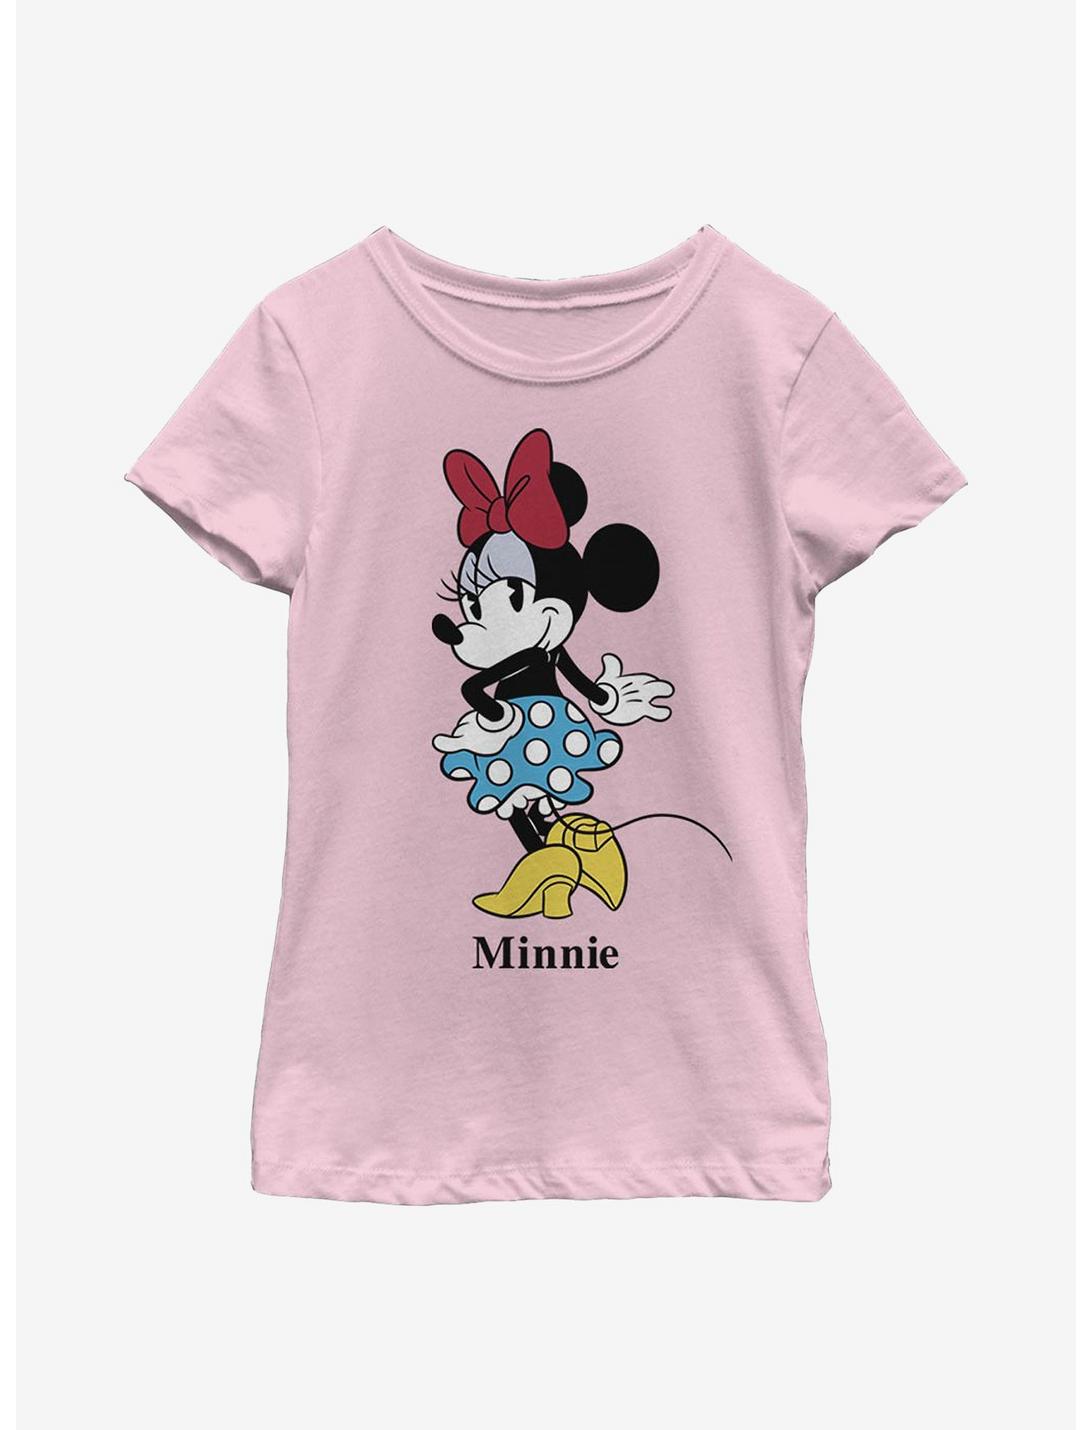 Disney Minnie Mouse Classic Skirt Youth Girls T-Shirt, PINK, hi-res